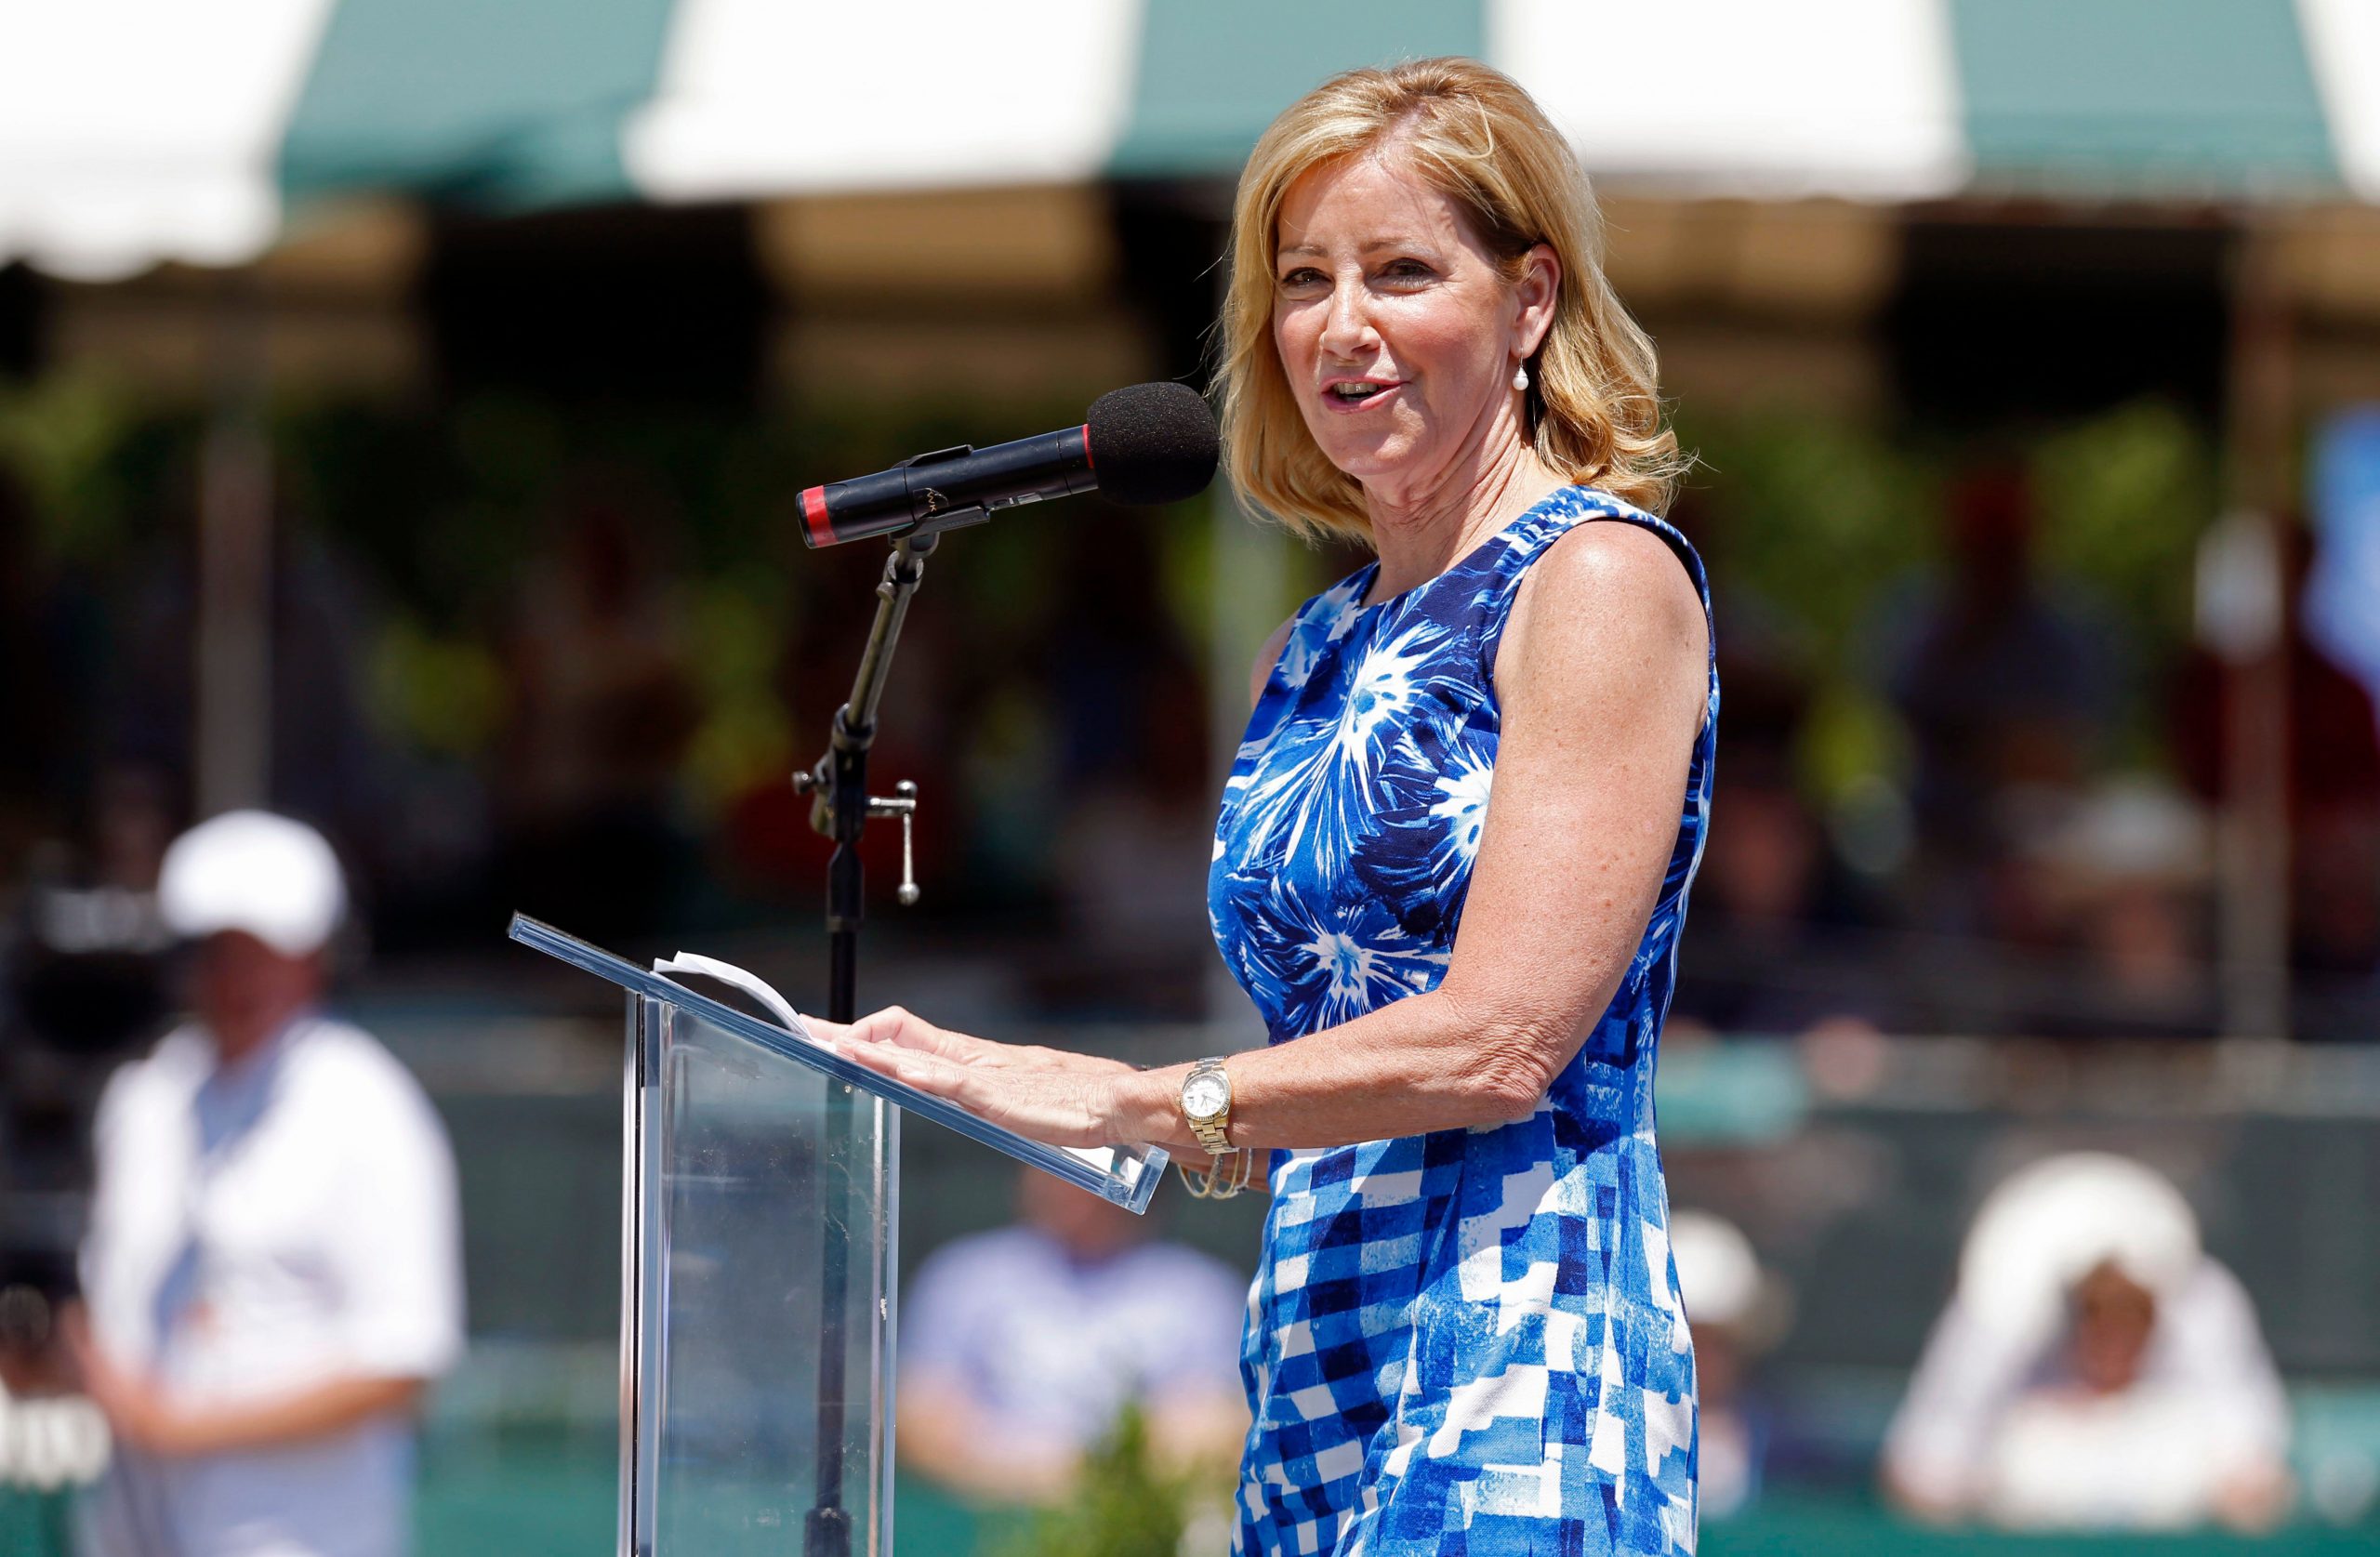 Chris Evert, Tennis Hall of Famer, diagnosed with ovarian cancer